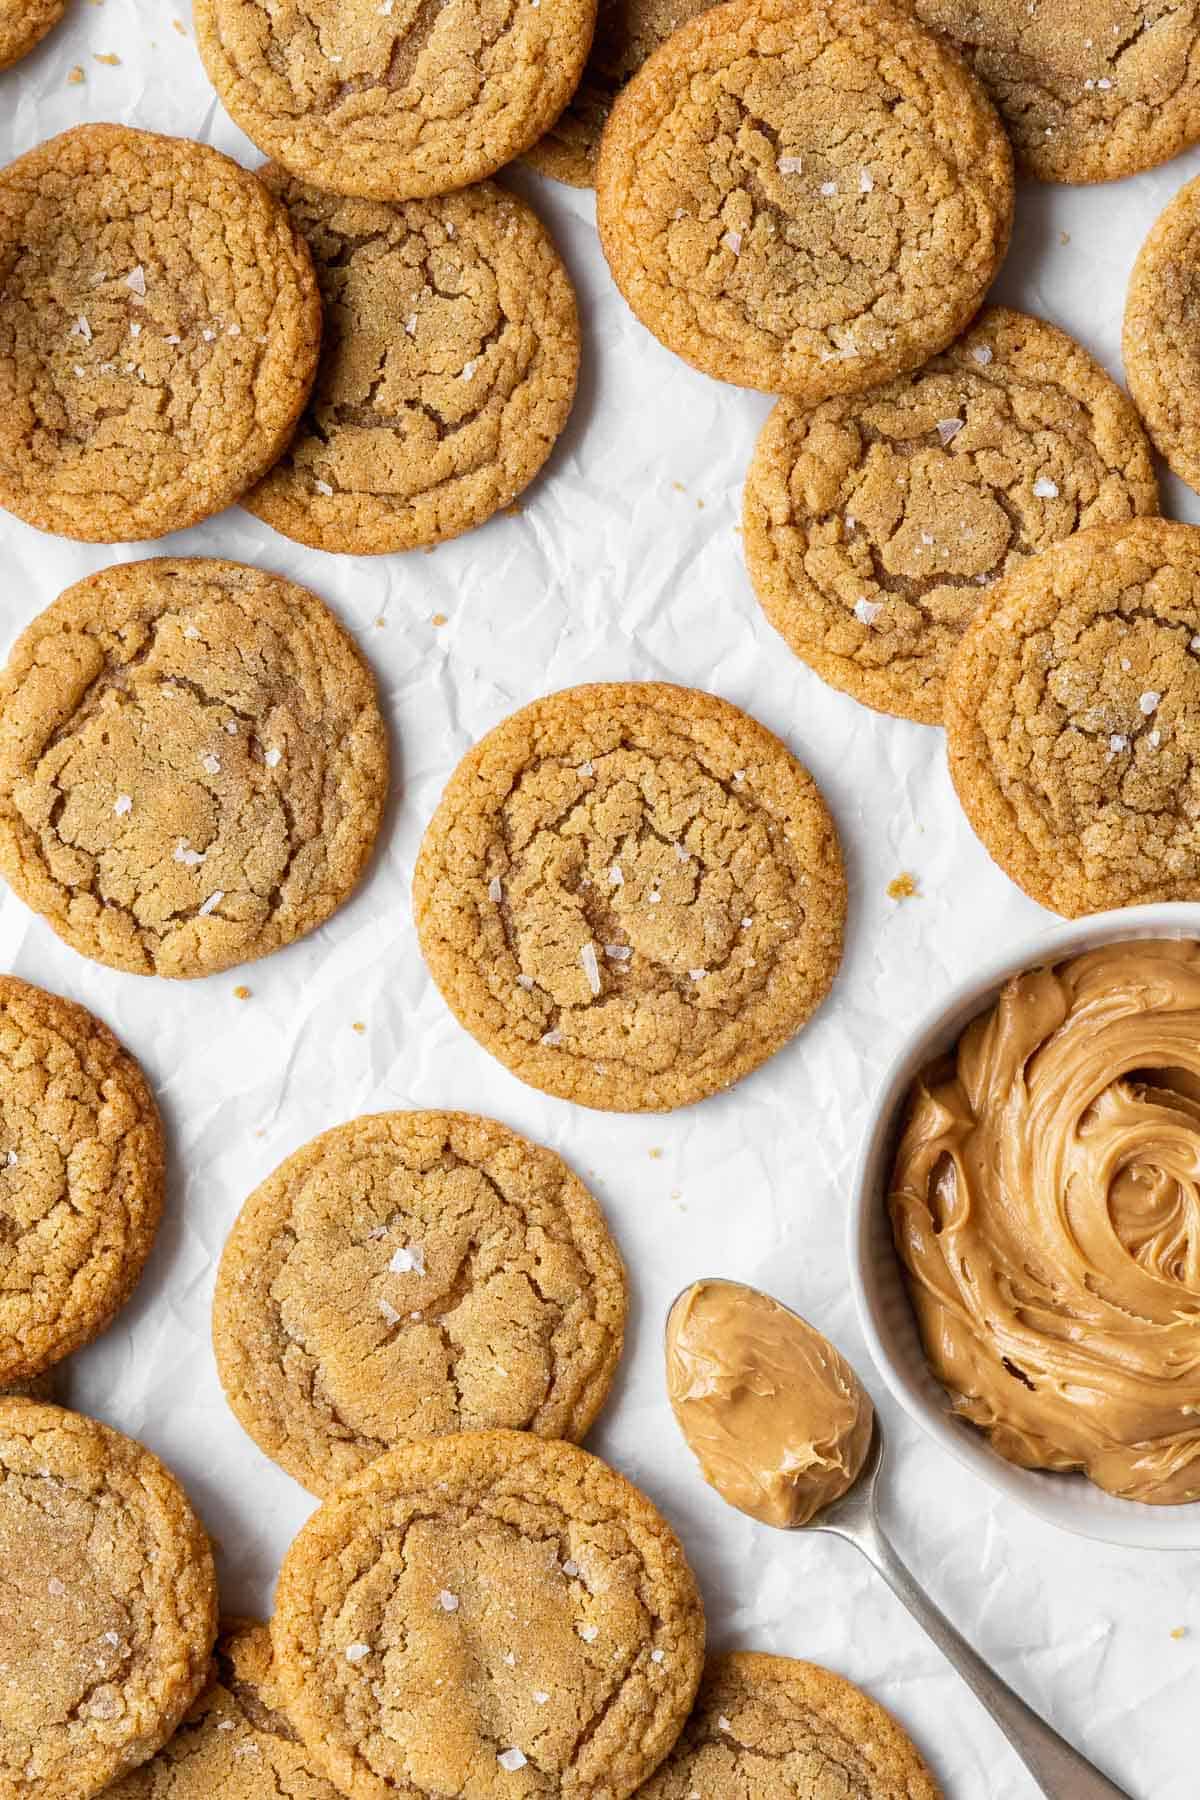 Dairy-free peanut butter cookies on parchment paper with a spoonful and bowl of peanut butter.